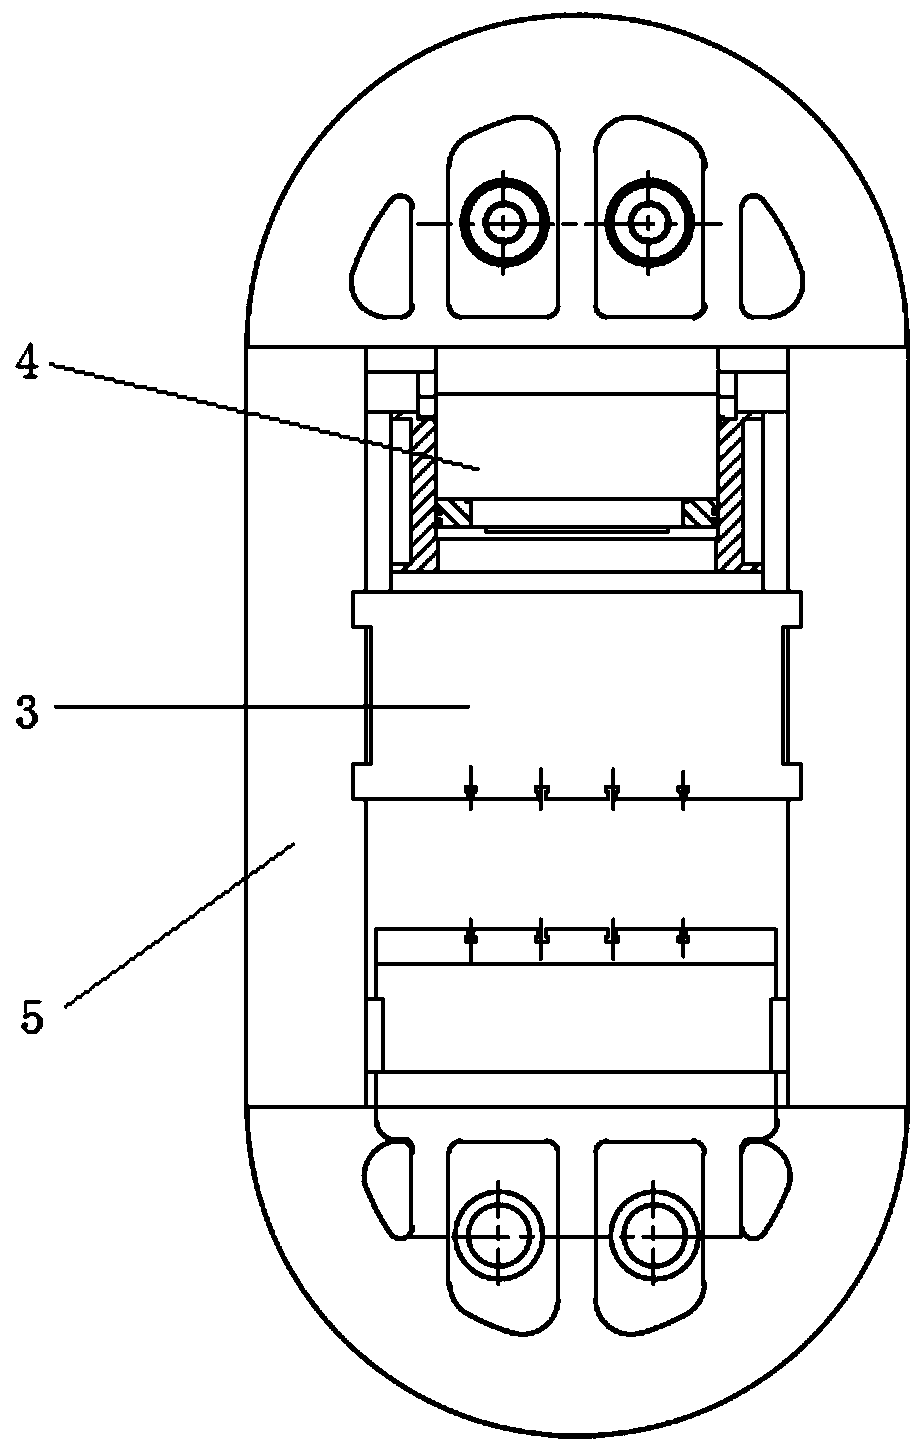 A 10,000-ton die forging press used for forging forgings with obvious cross-section changes